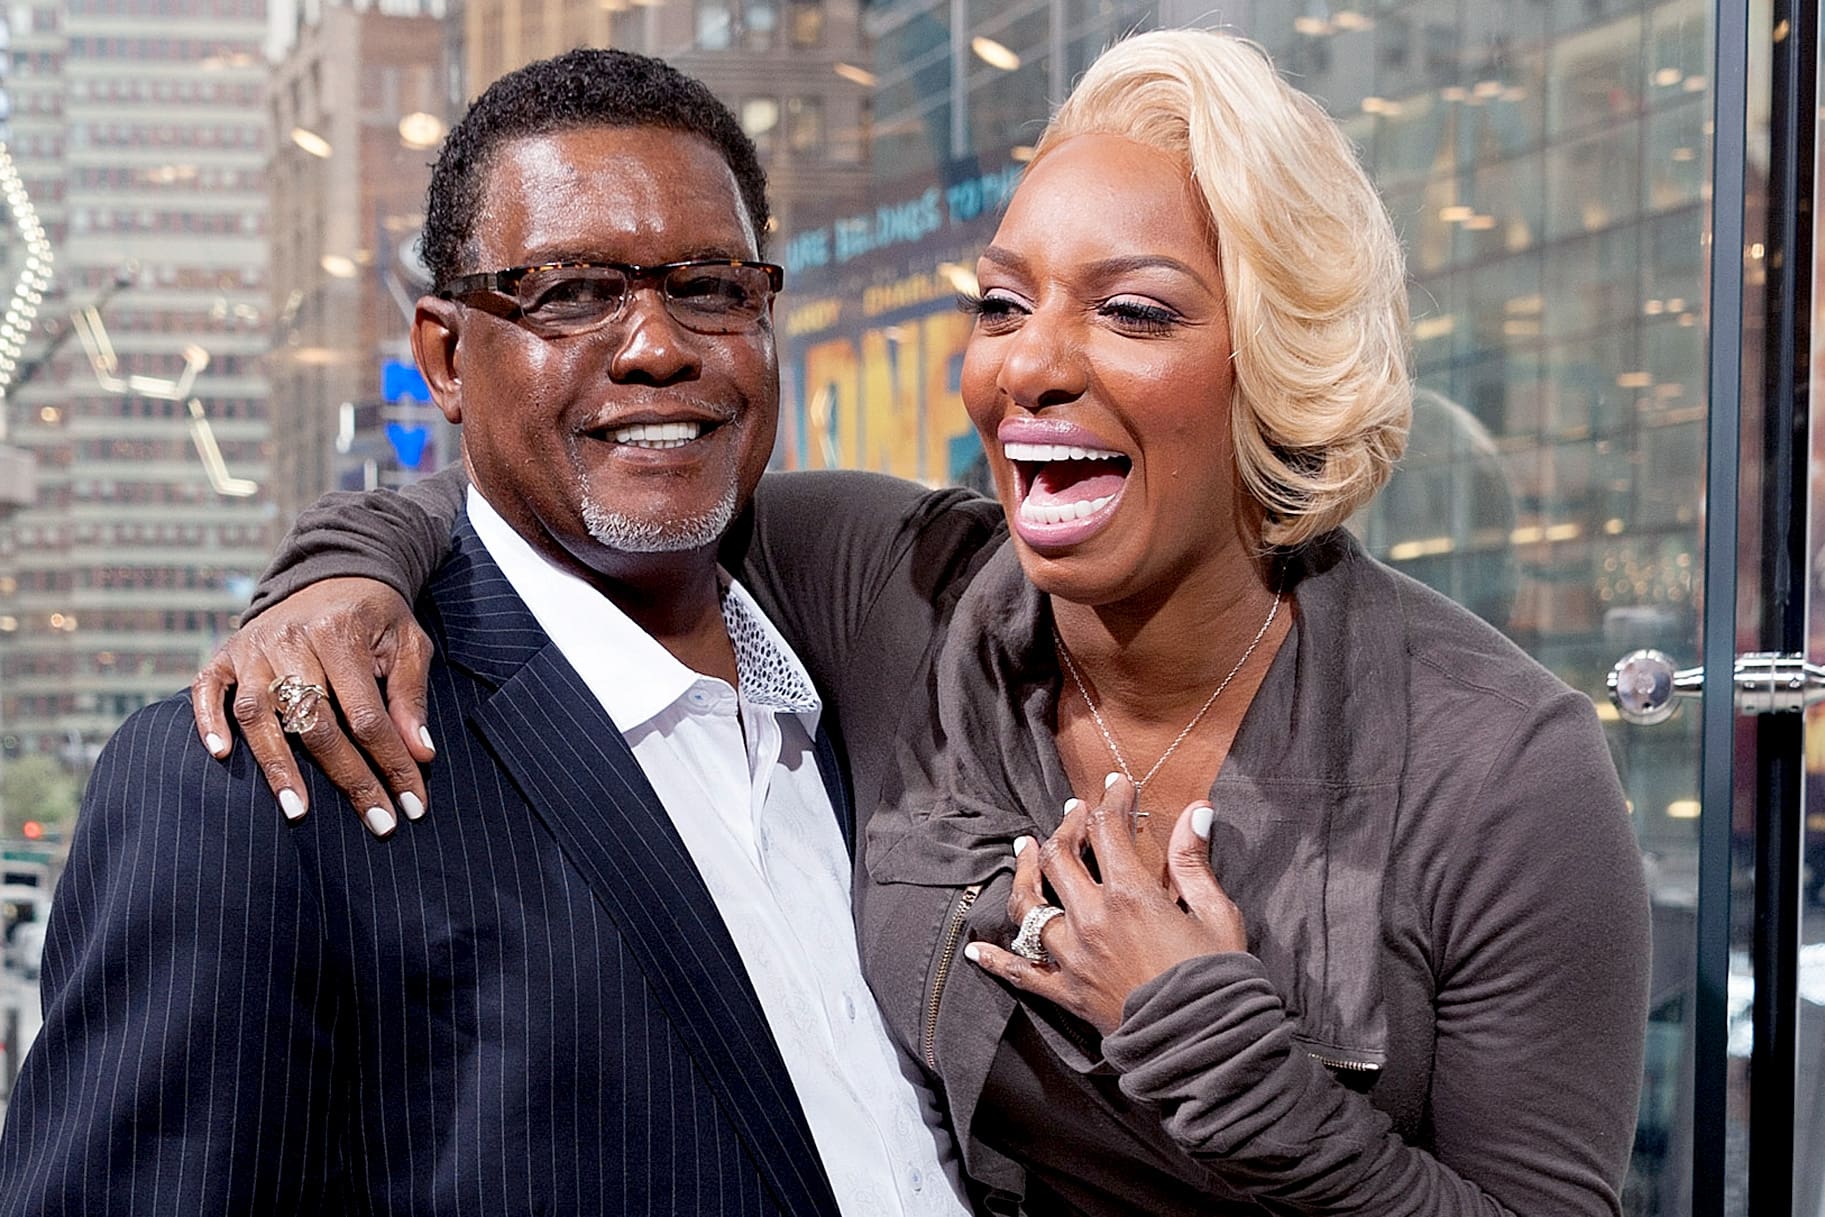 After Slamming Separation Rumors, NeNe Leakes Pens Kind Words For Gregg Leakes - Read Her Emotional Message Here - She's Hinting At Some Happy News